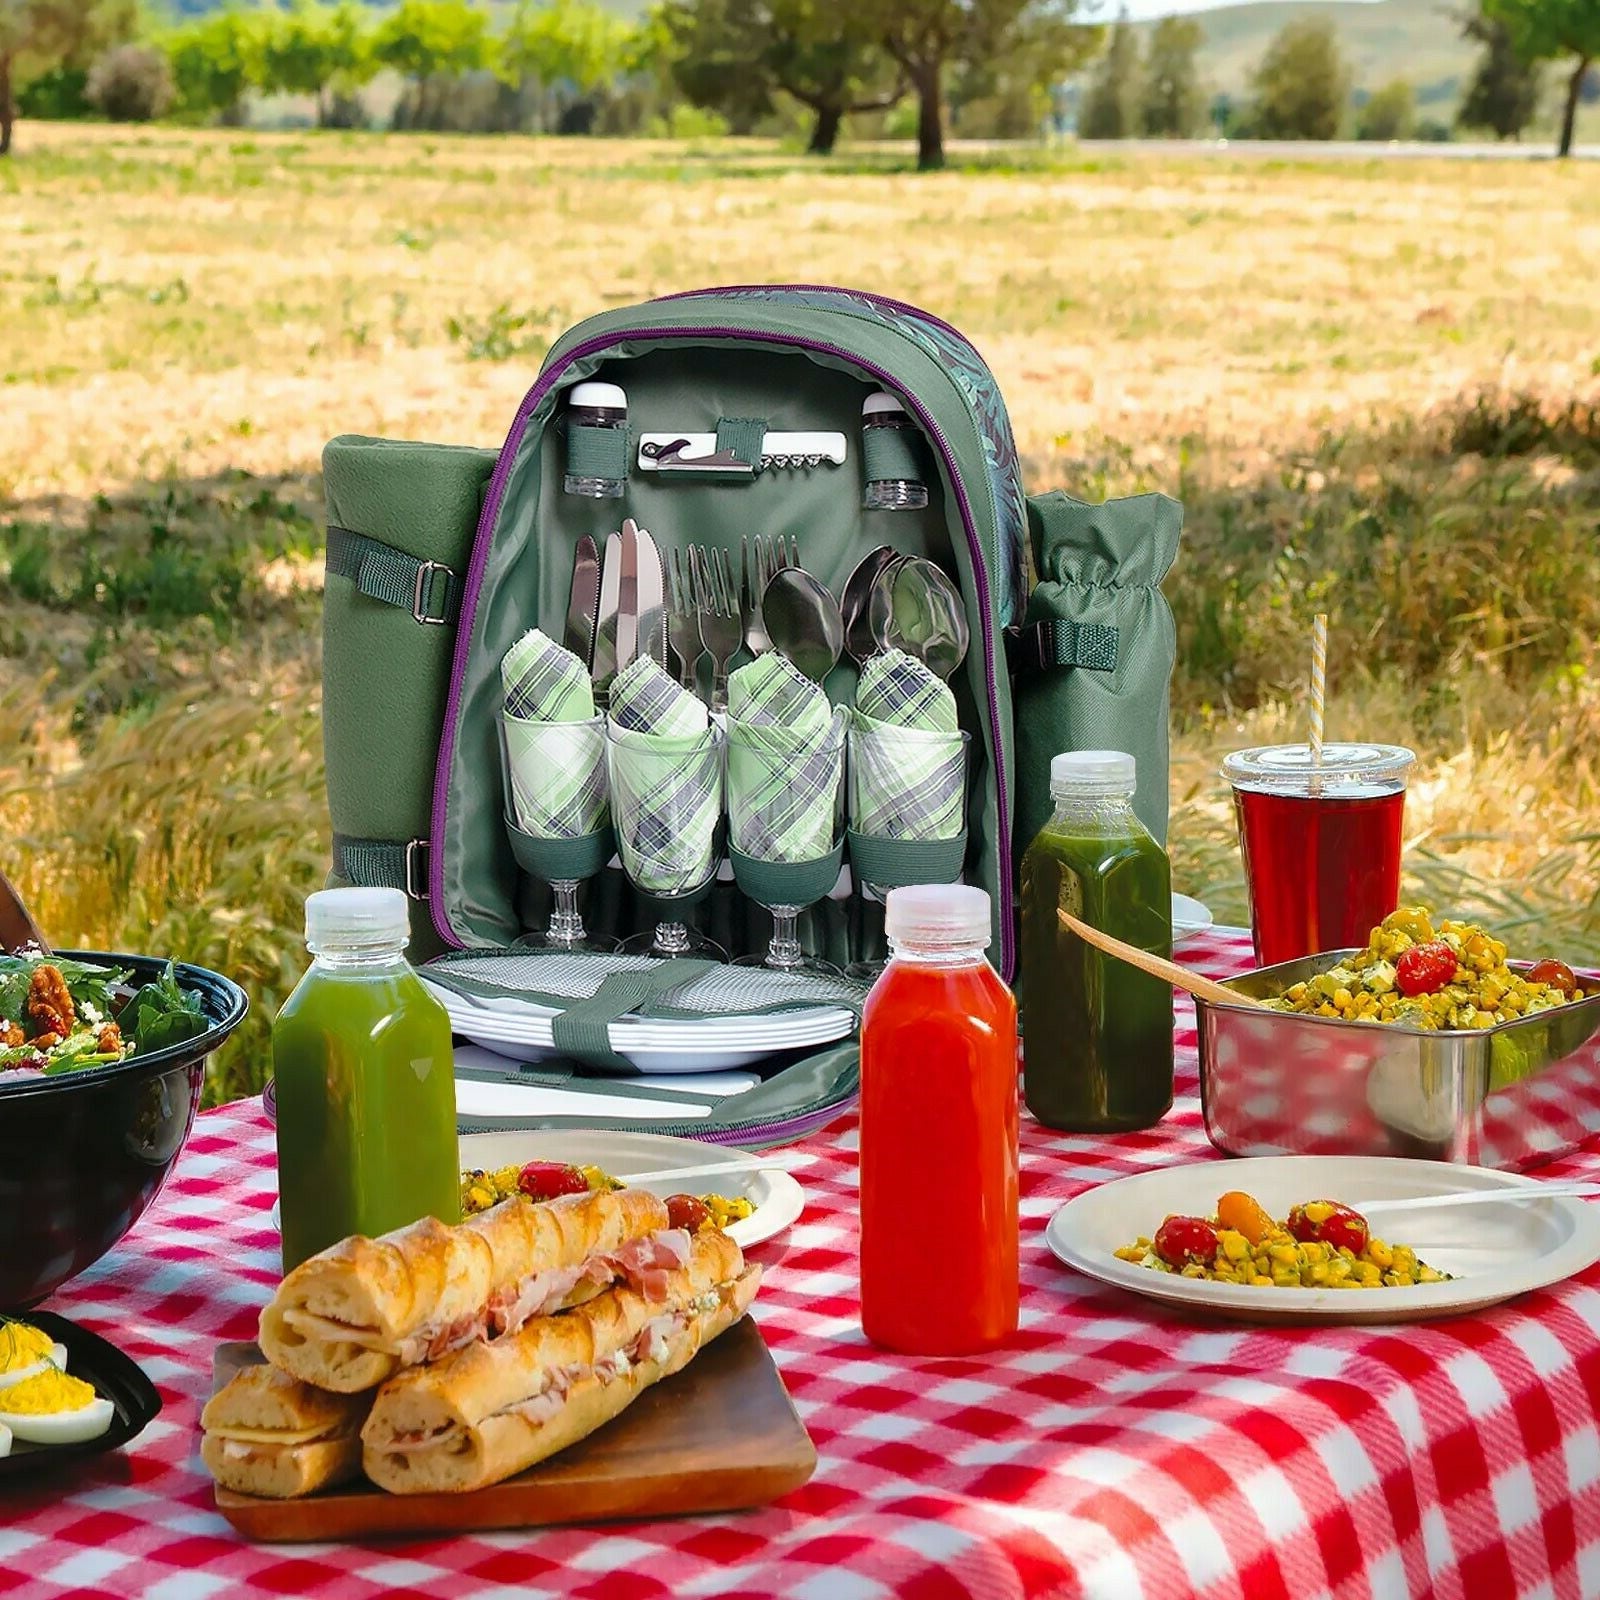 Picnic Set With Cutlery Kit Cooler Compartment Blanket For 4 People